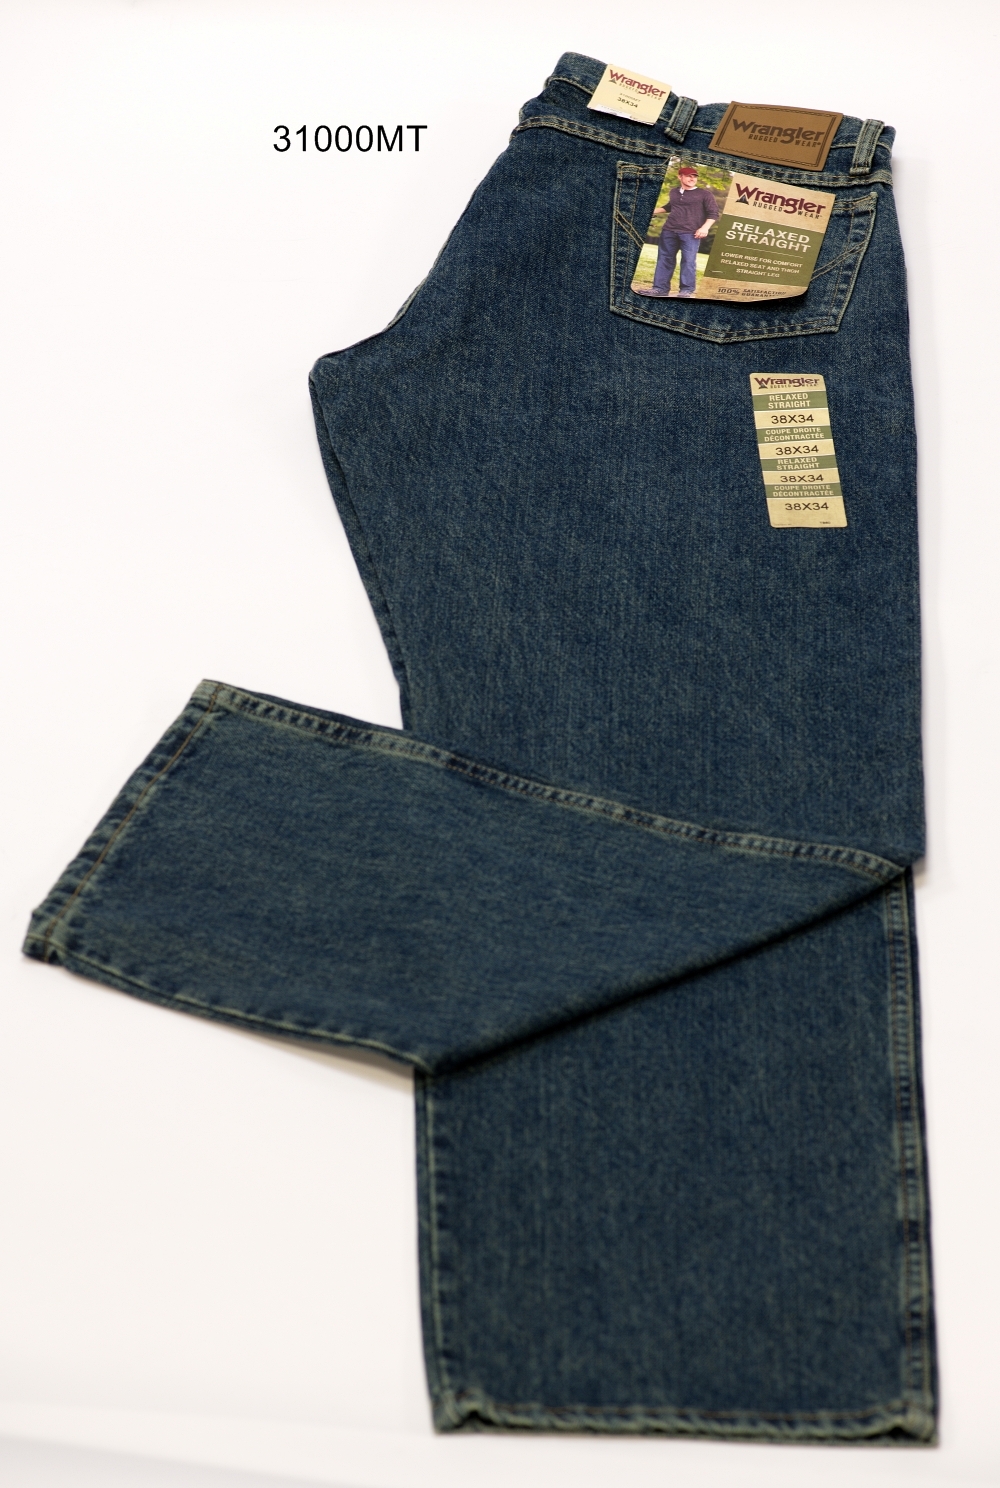 Wrangler Relaxed Fit Rugged Denim | Gilbert's Big & Tall Clothing